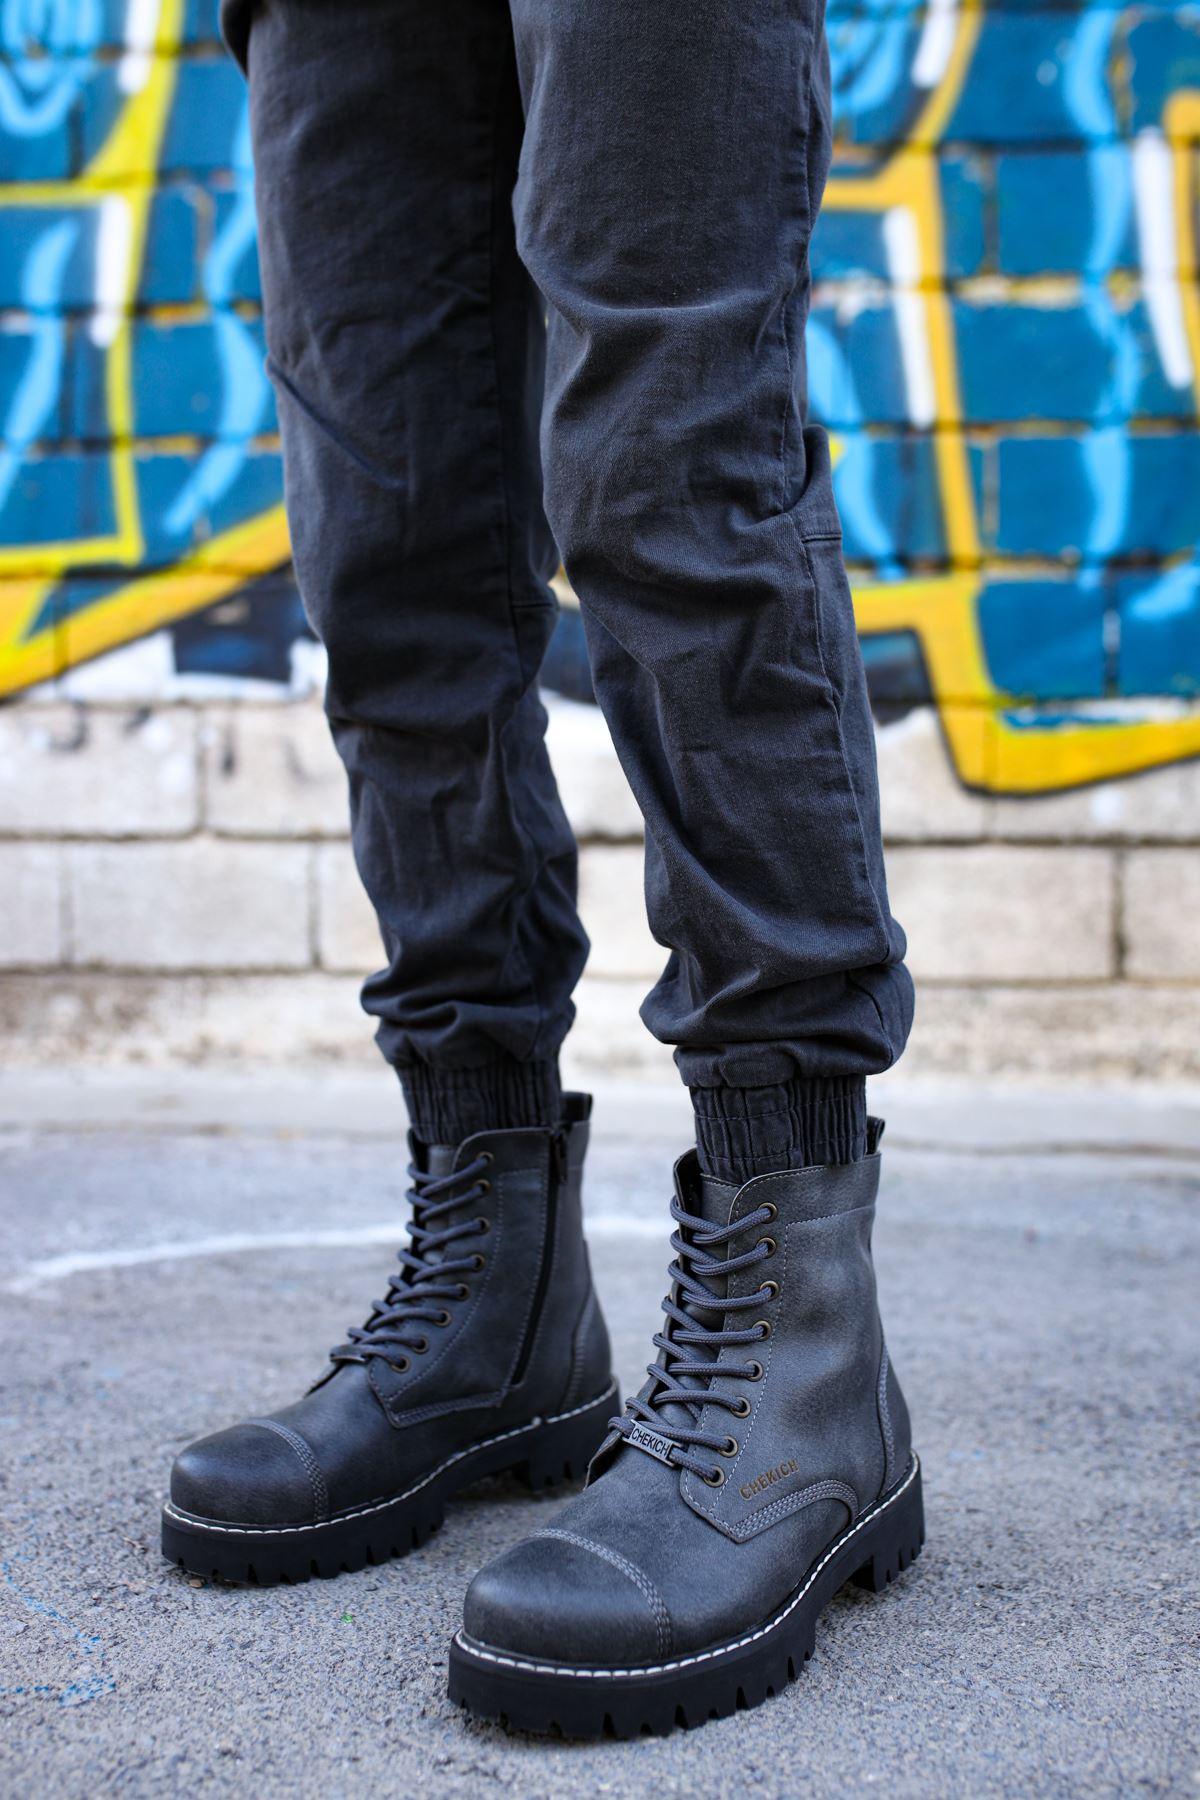 CH009 Men's Leather Navy Blue-Black Sole Casual Winter Boots - STREET MODE ™